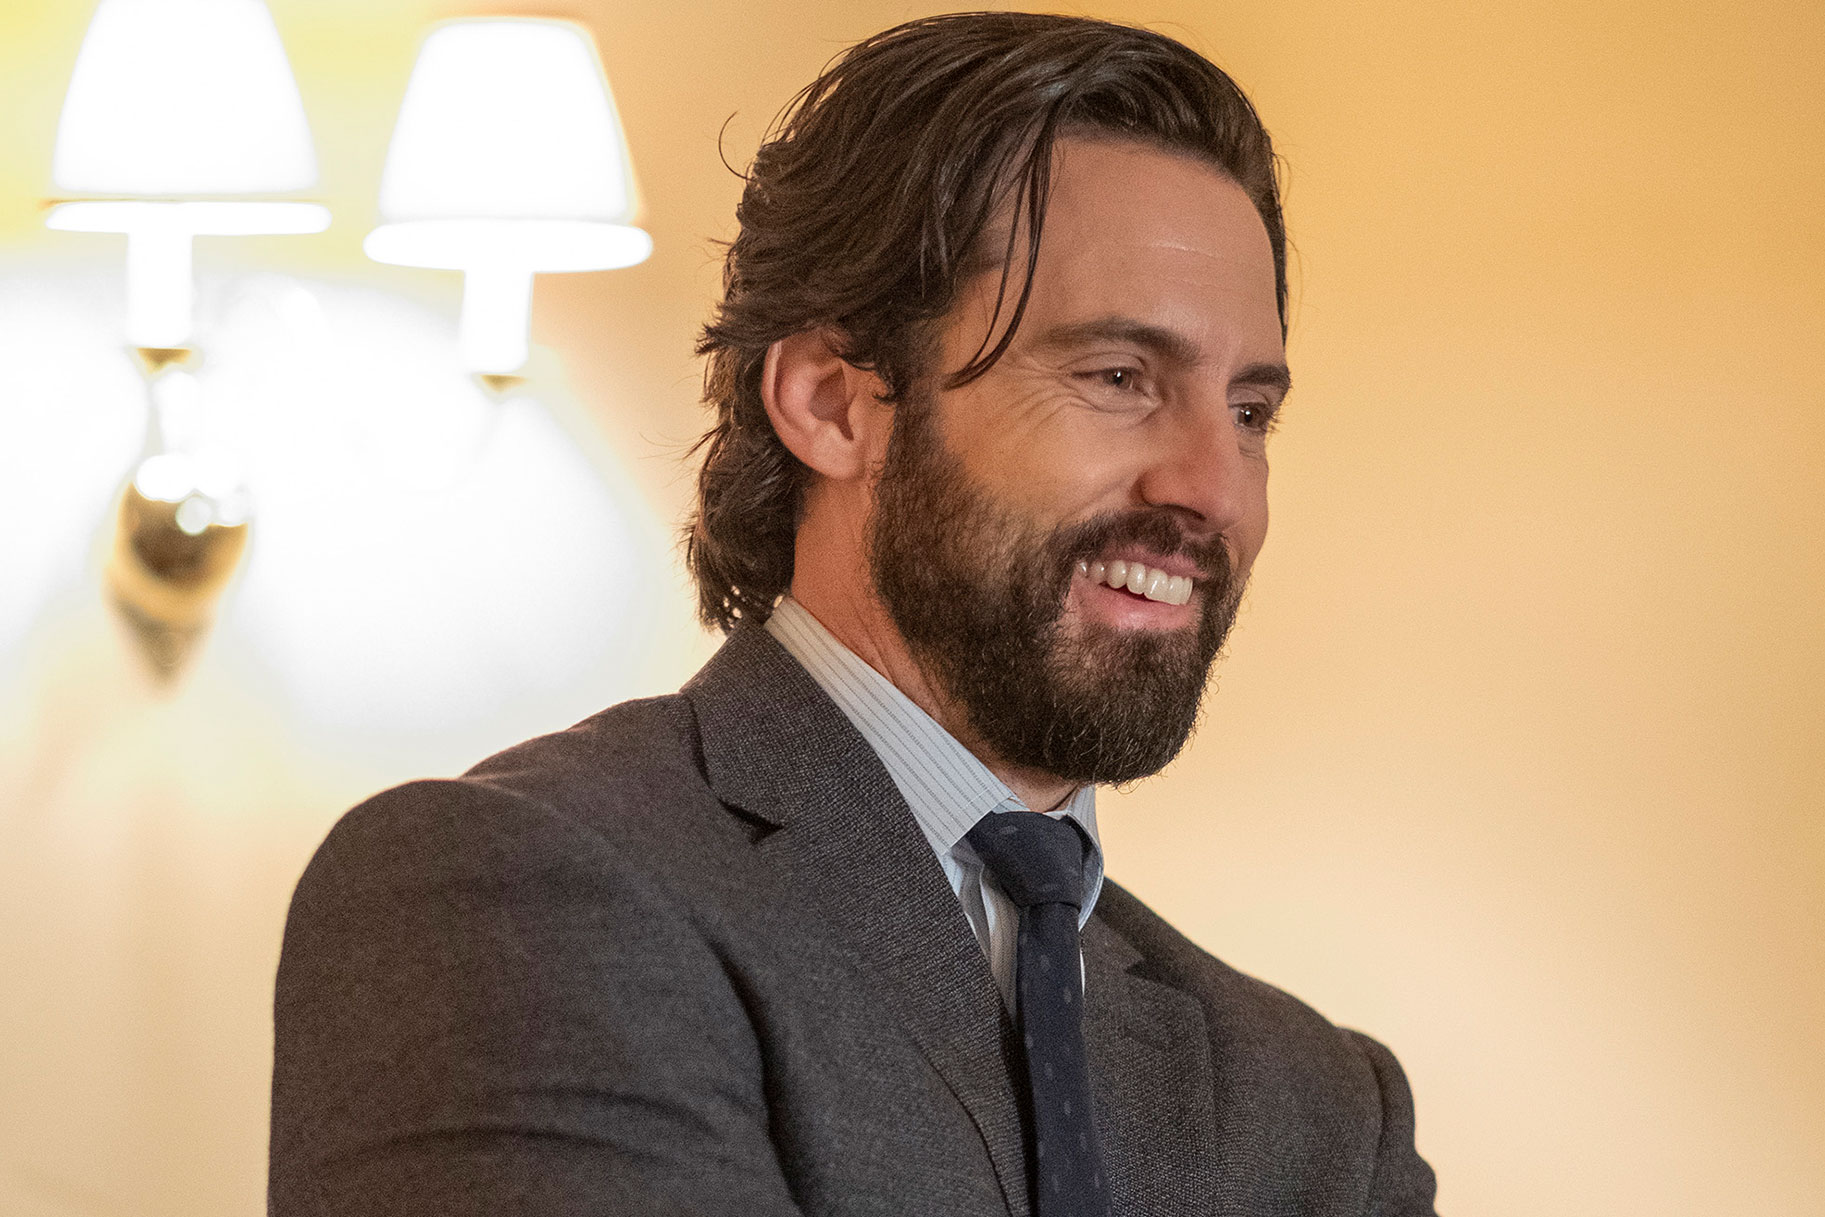 Milo Ventimiglia as Jack Pearson, smiling while wearing a grey suit